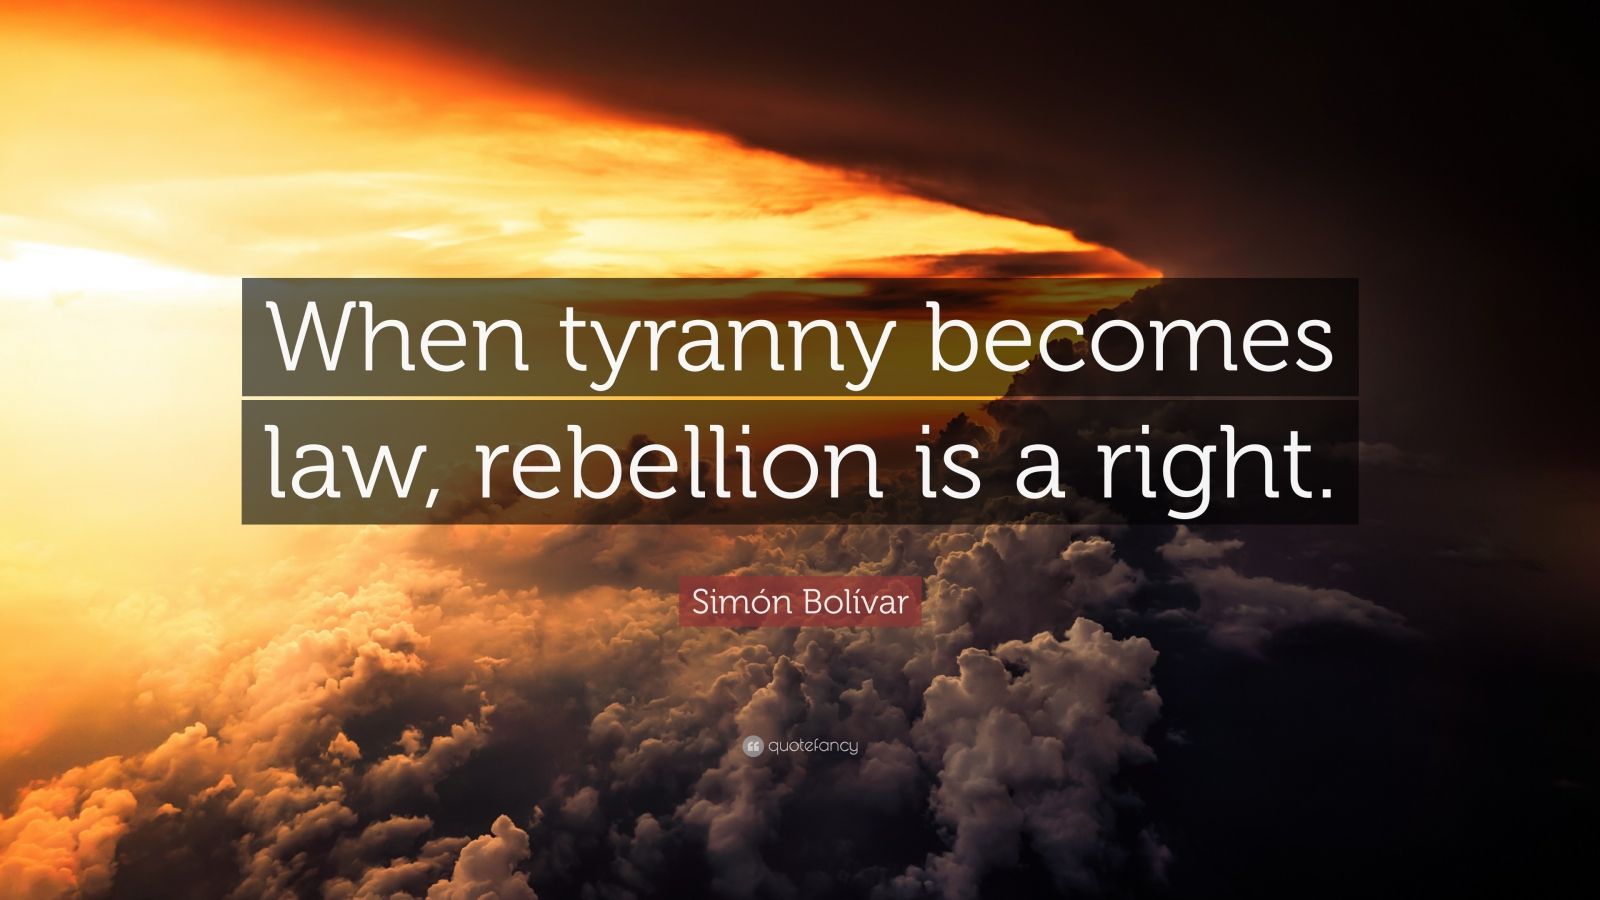 when tyranny becomes law quote